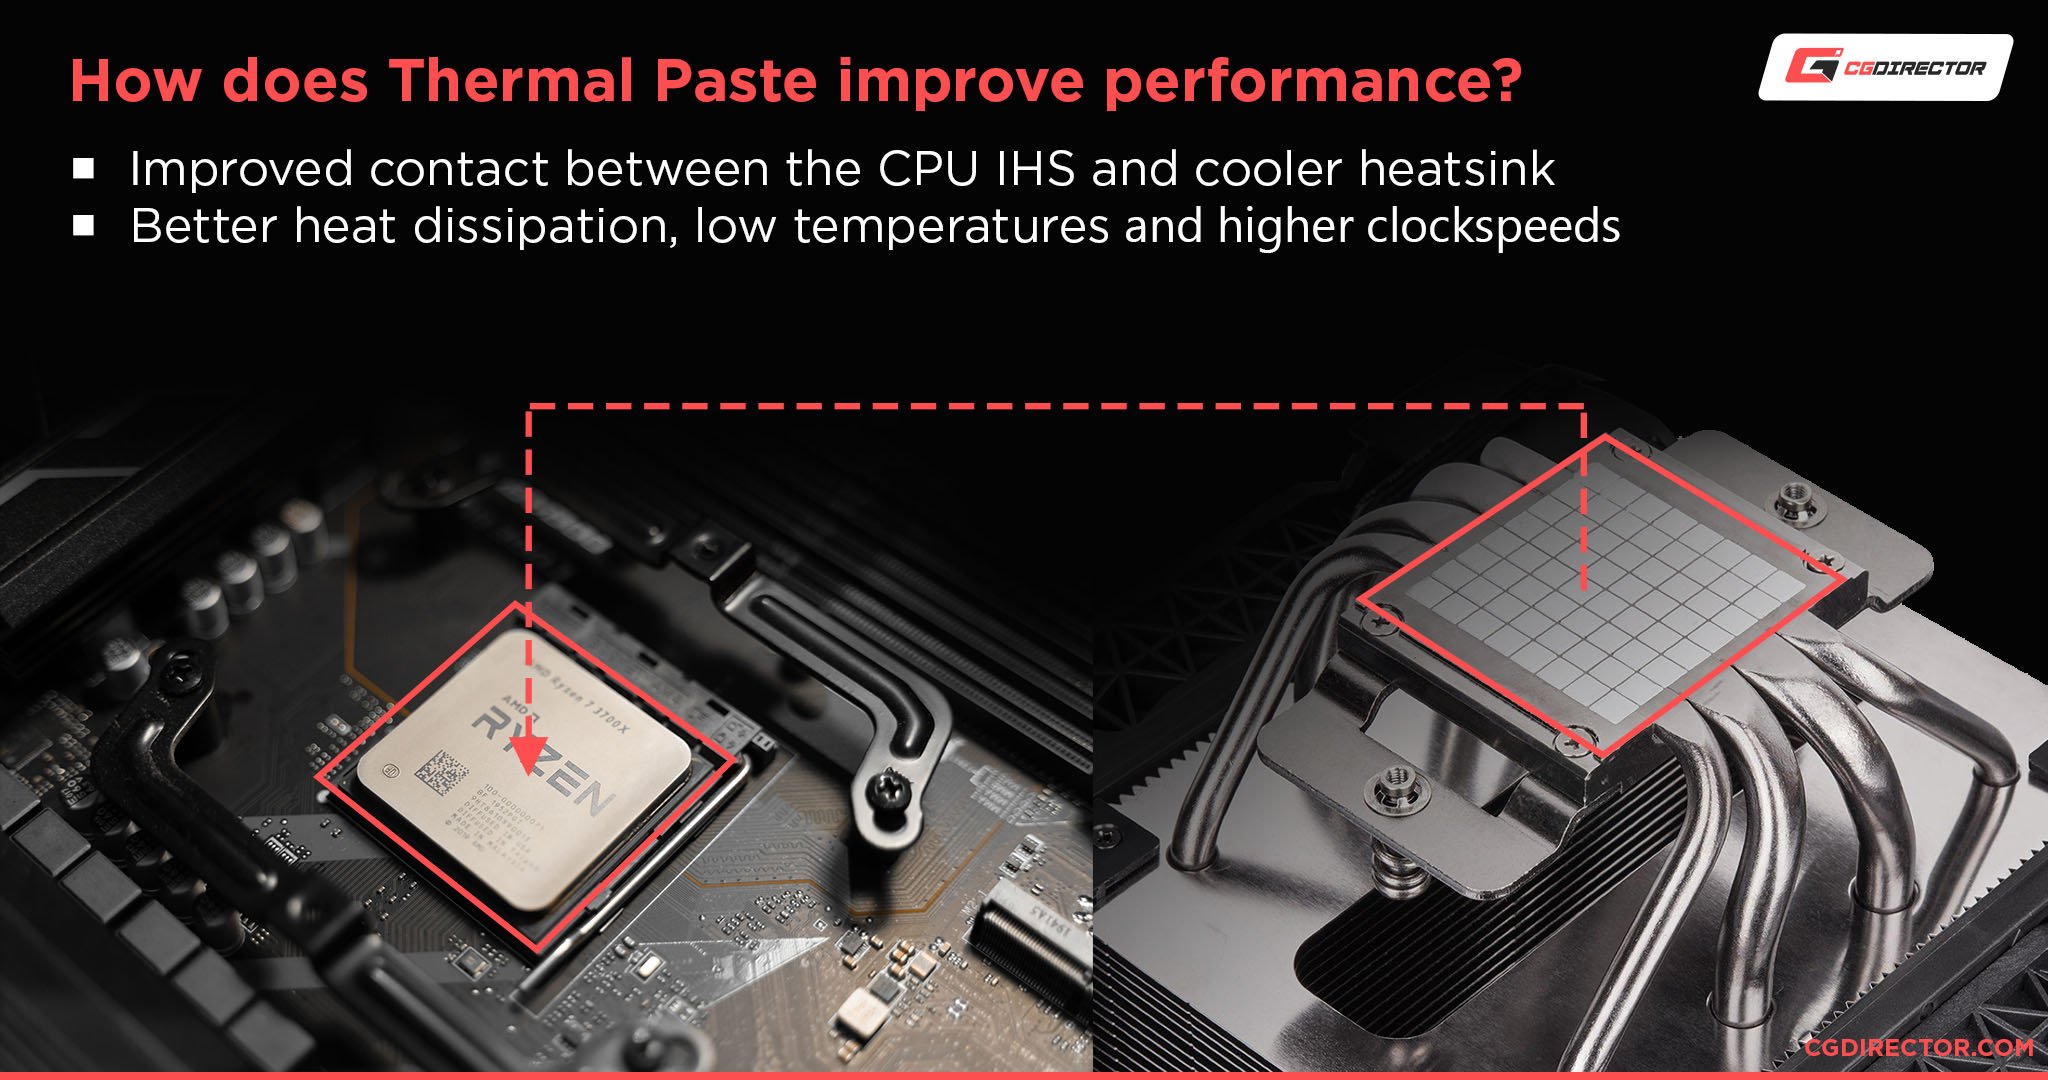 Gelid says its new thermal pad beats thermal paste in performance